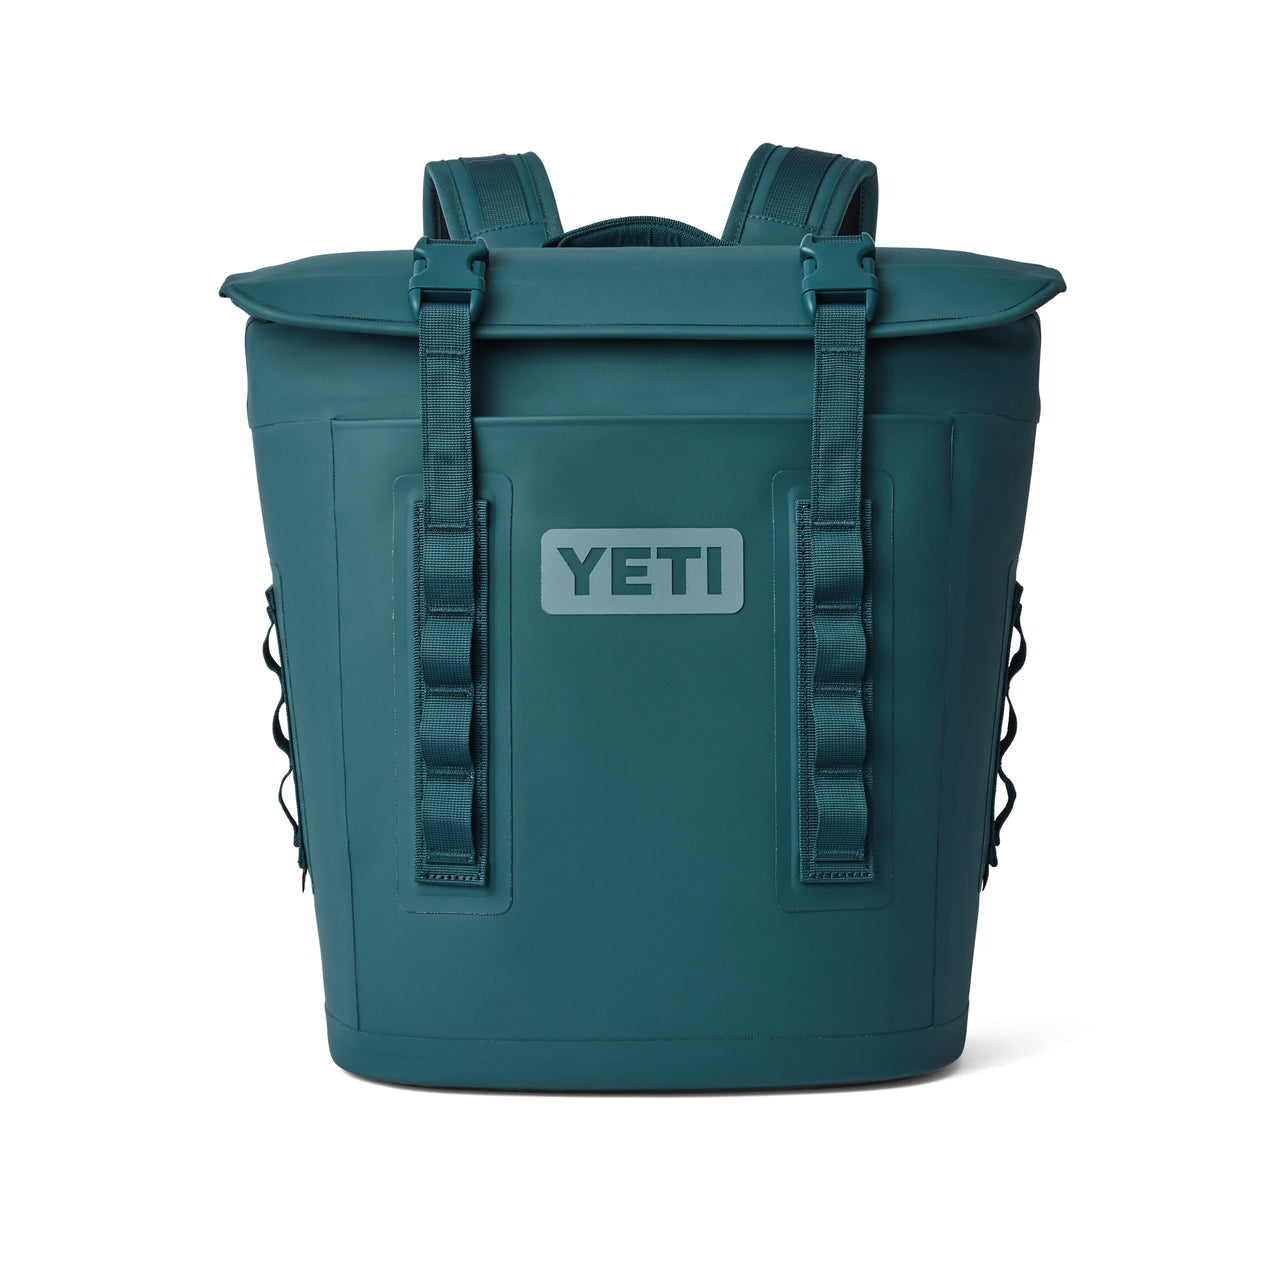 YETI - M12 Cooler Backpack